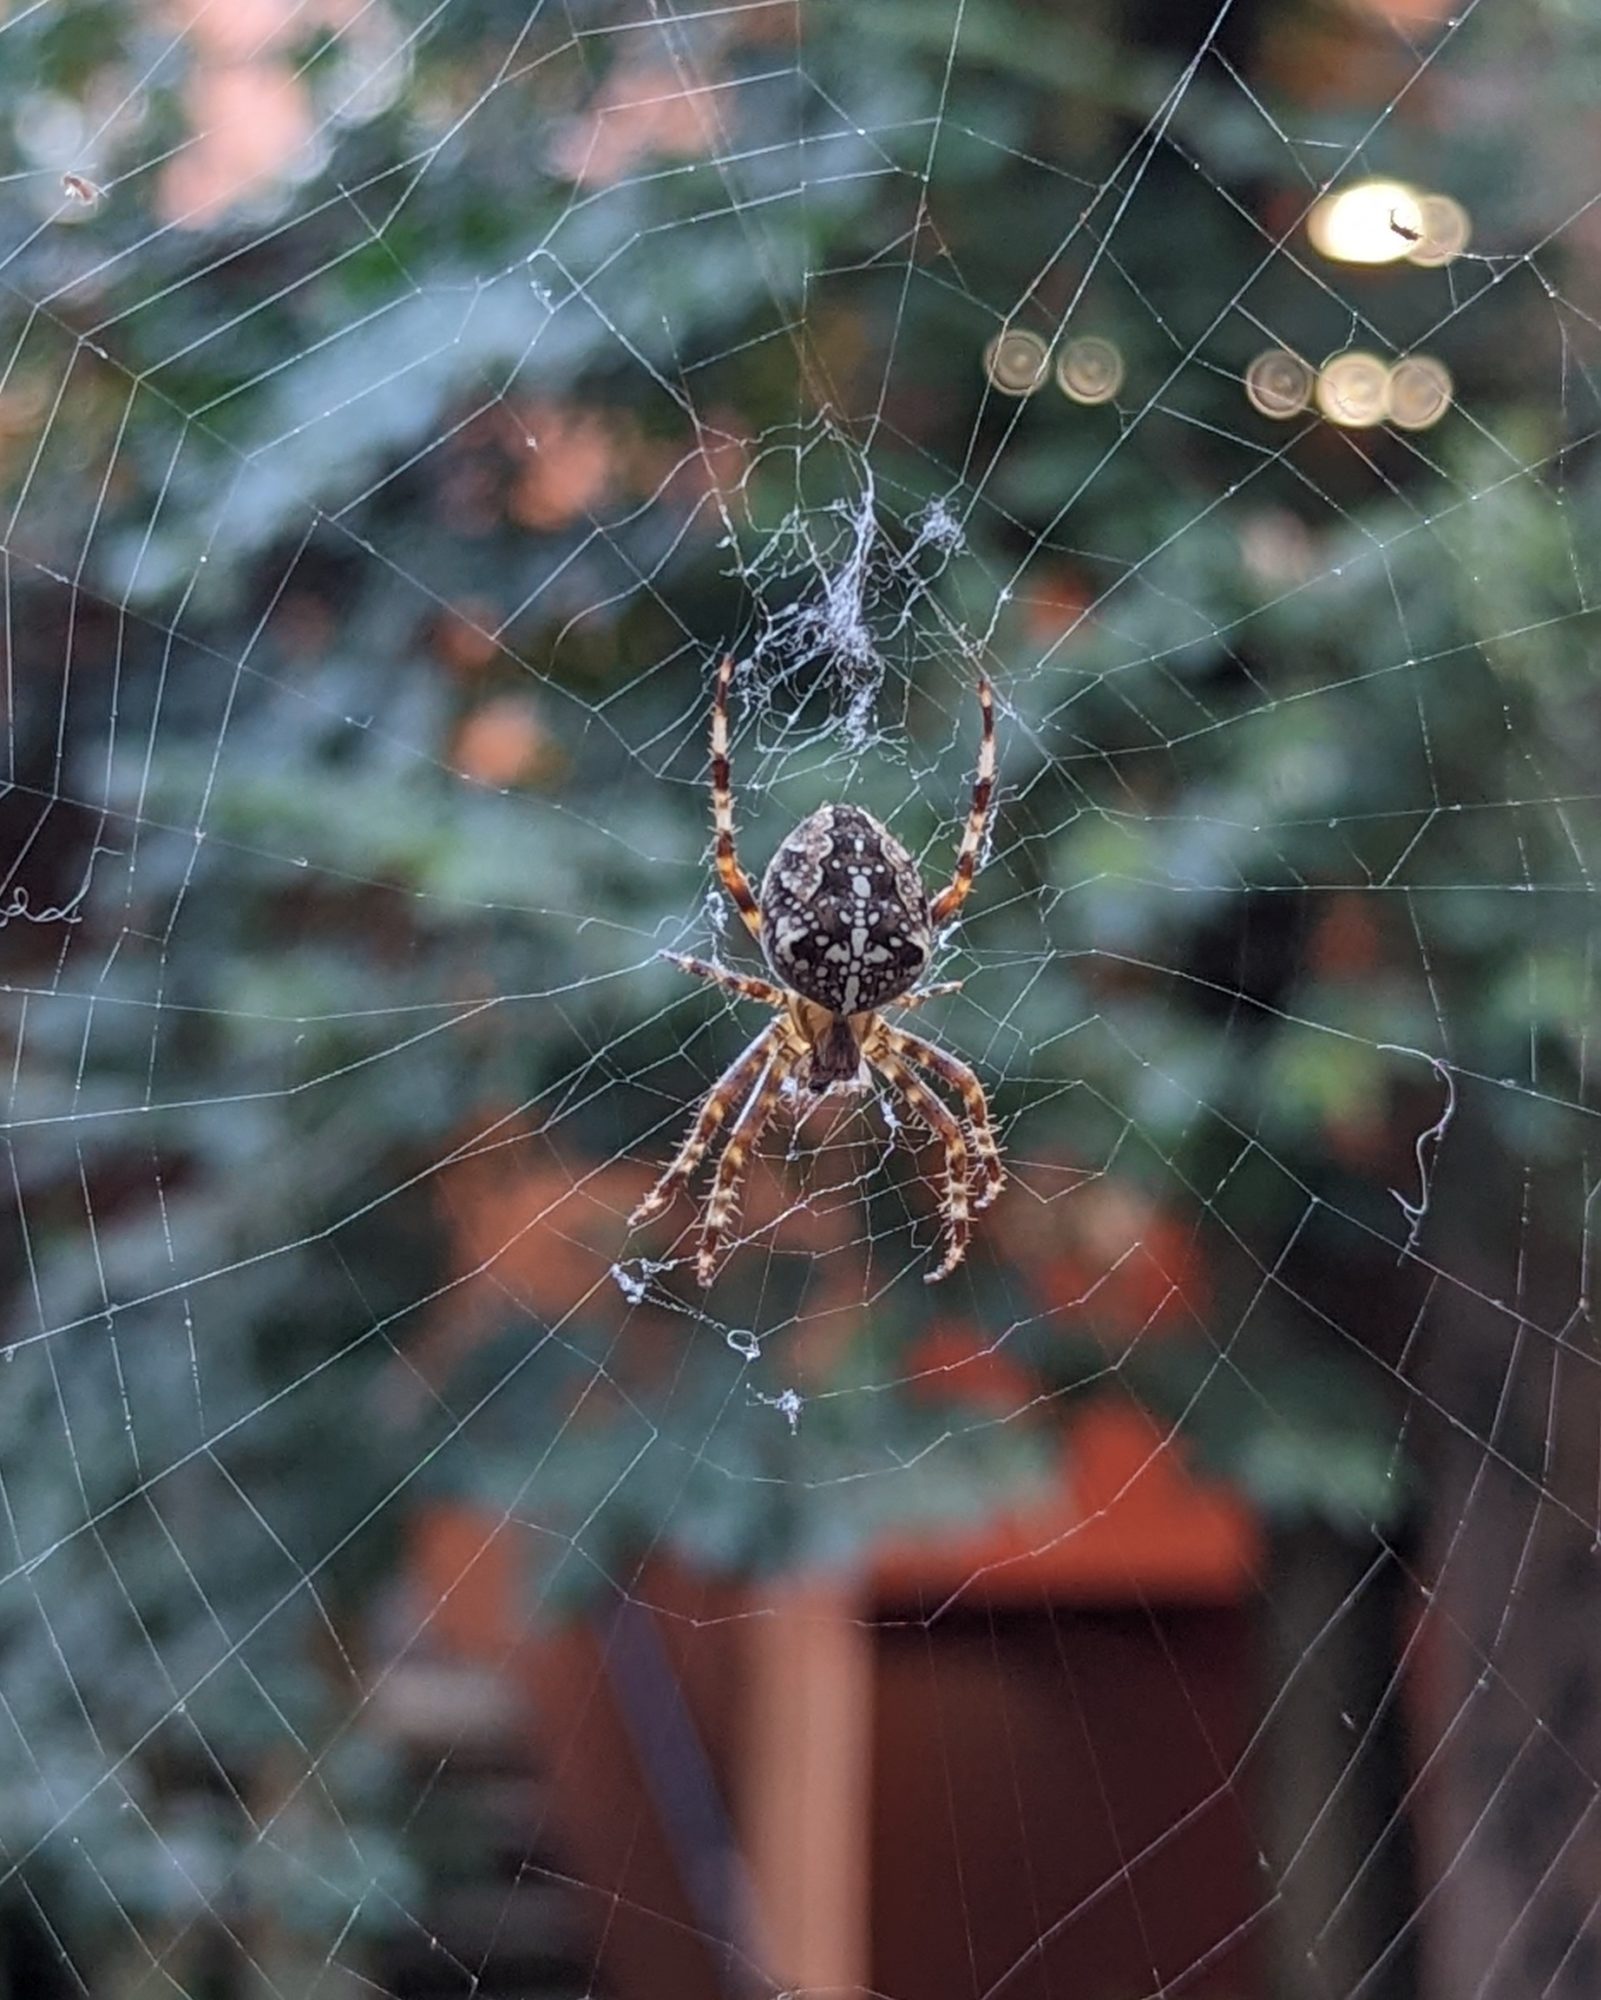 Orb weaver and web